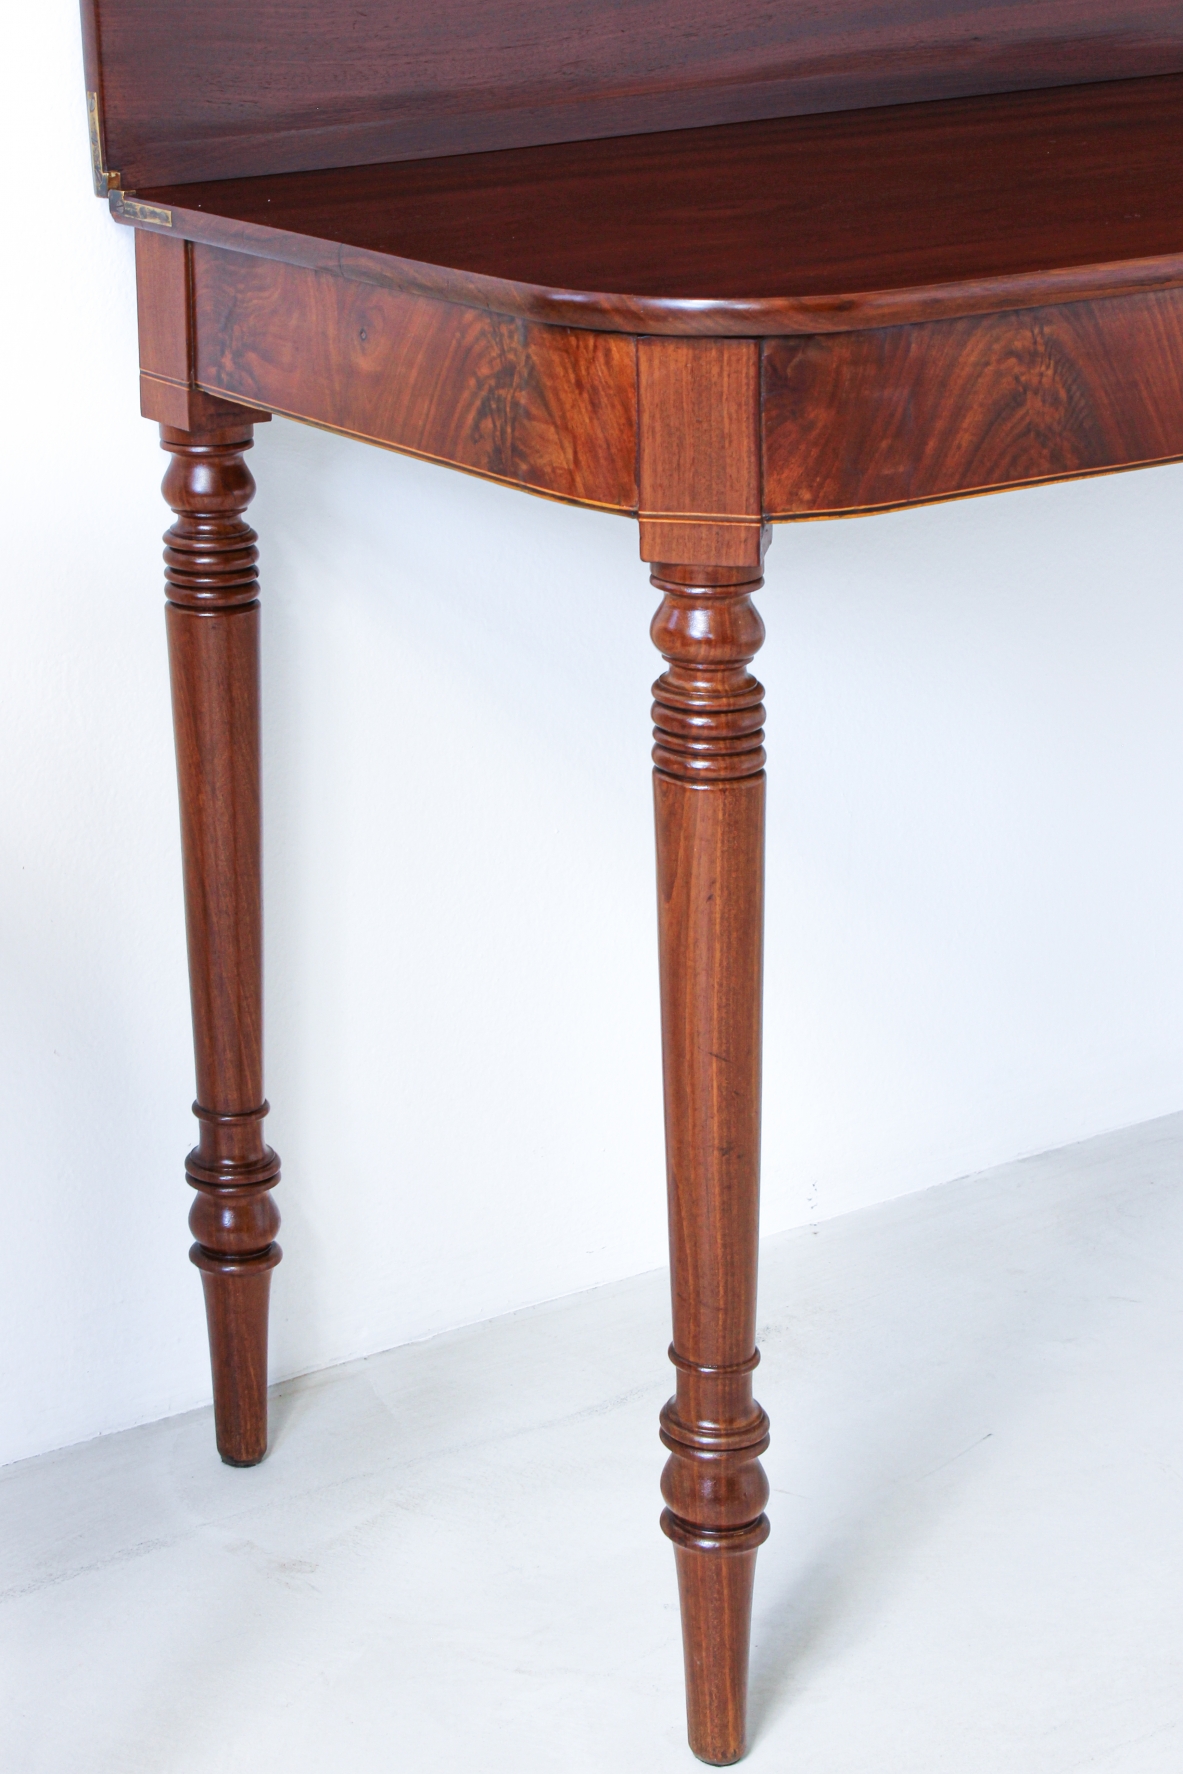 Pair of elegant consoles in mahogany with double book top and turned legs.